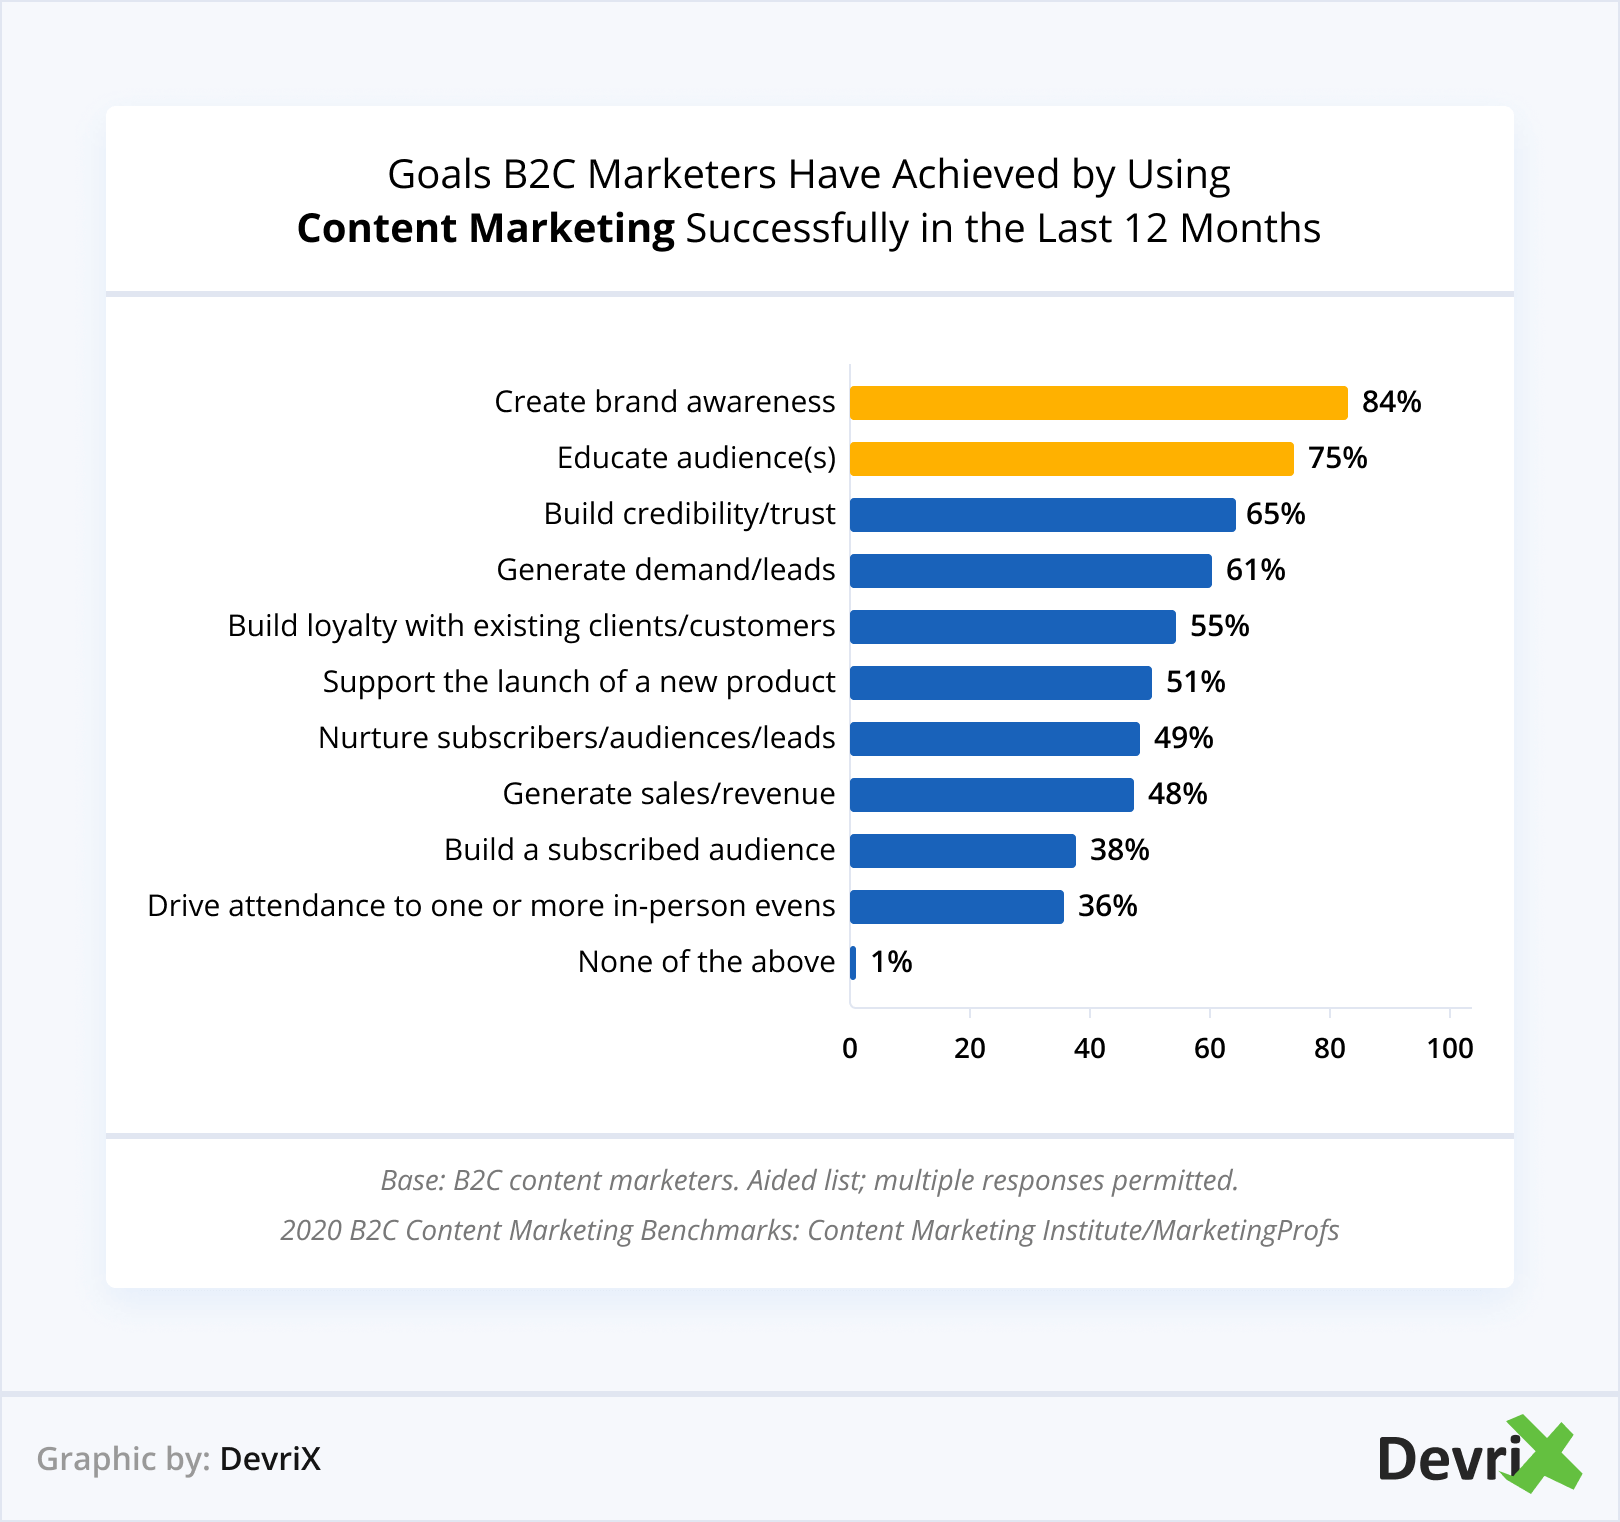 Goals B2C Marketers Have Achieved by Using Content Marketing Successfully in Last 12 Months